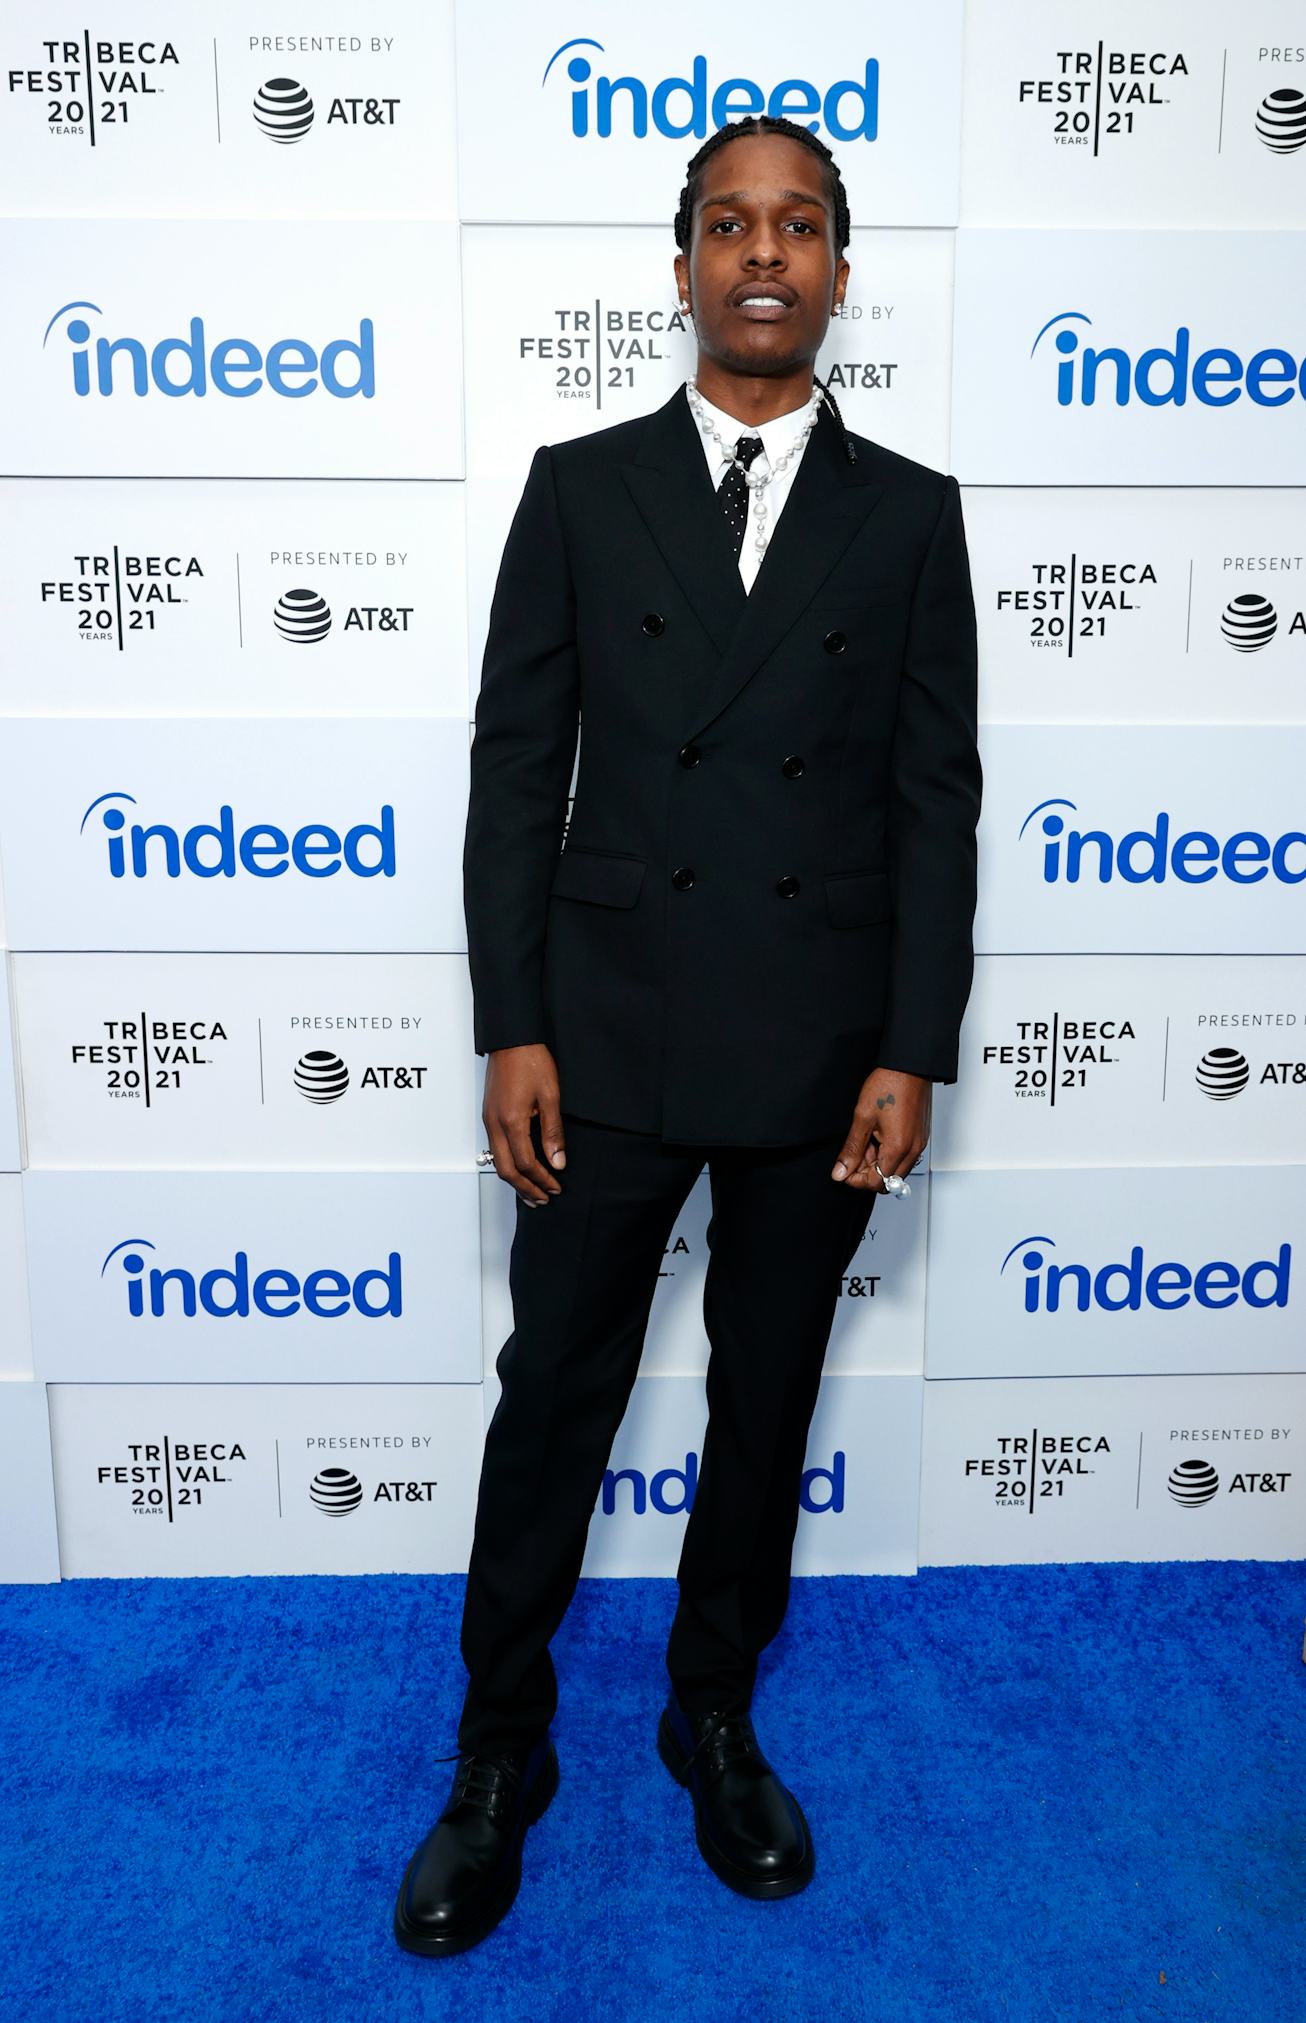 NEW YORK, NEW YORK - JUNE 13: A$AP Rocky attends 2021 Tribeca Festival Premiere of "Stockholm Syndro...